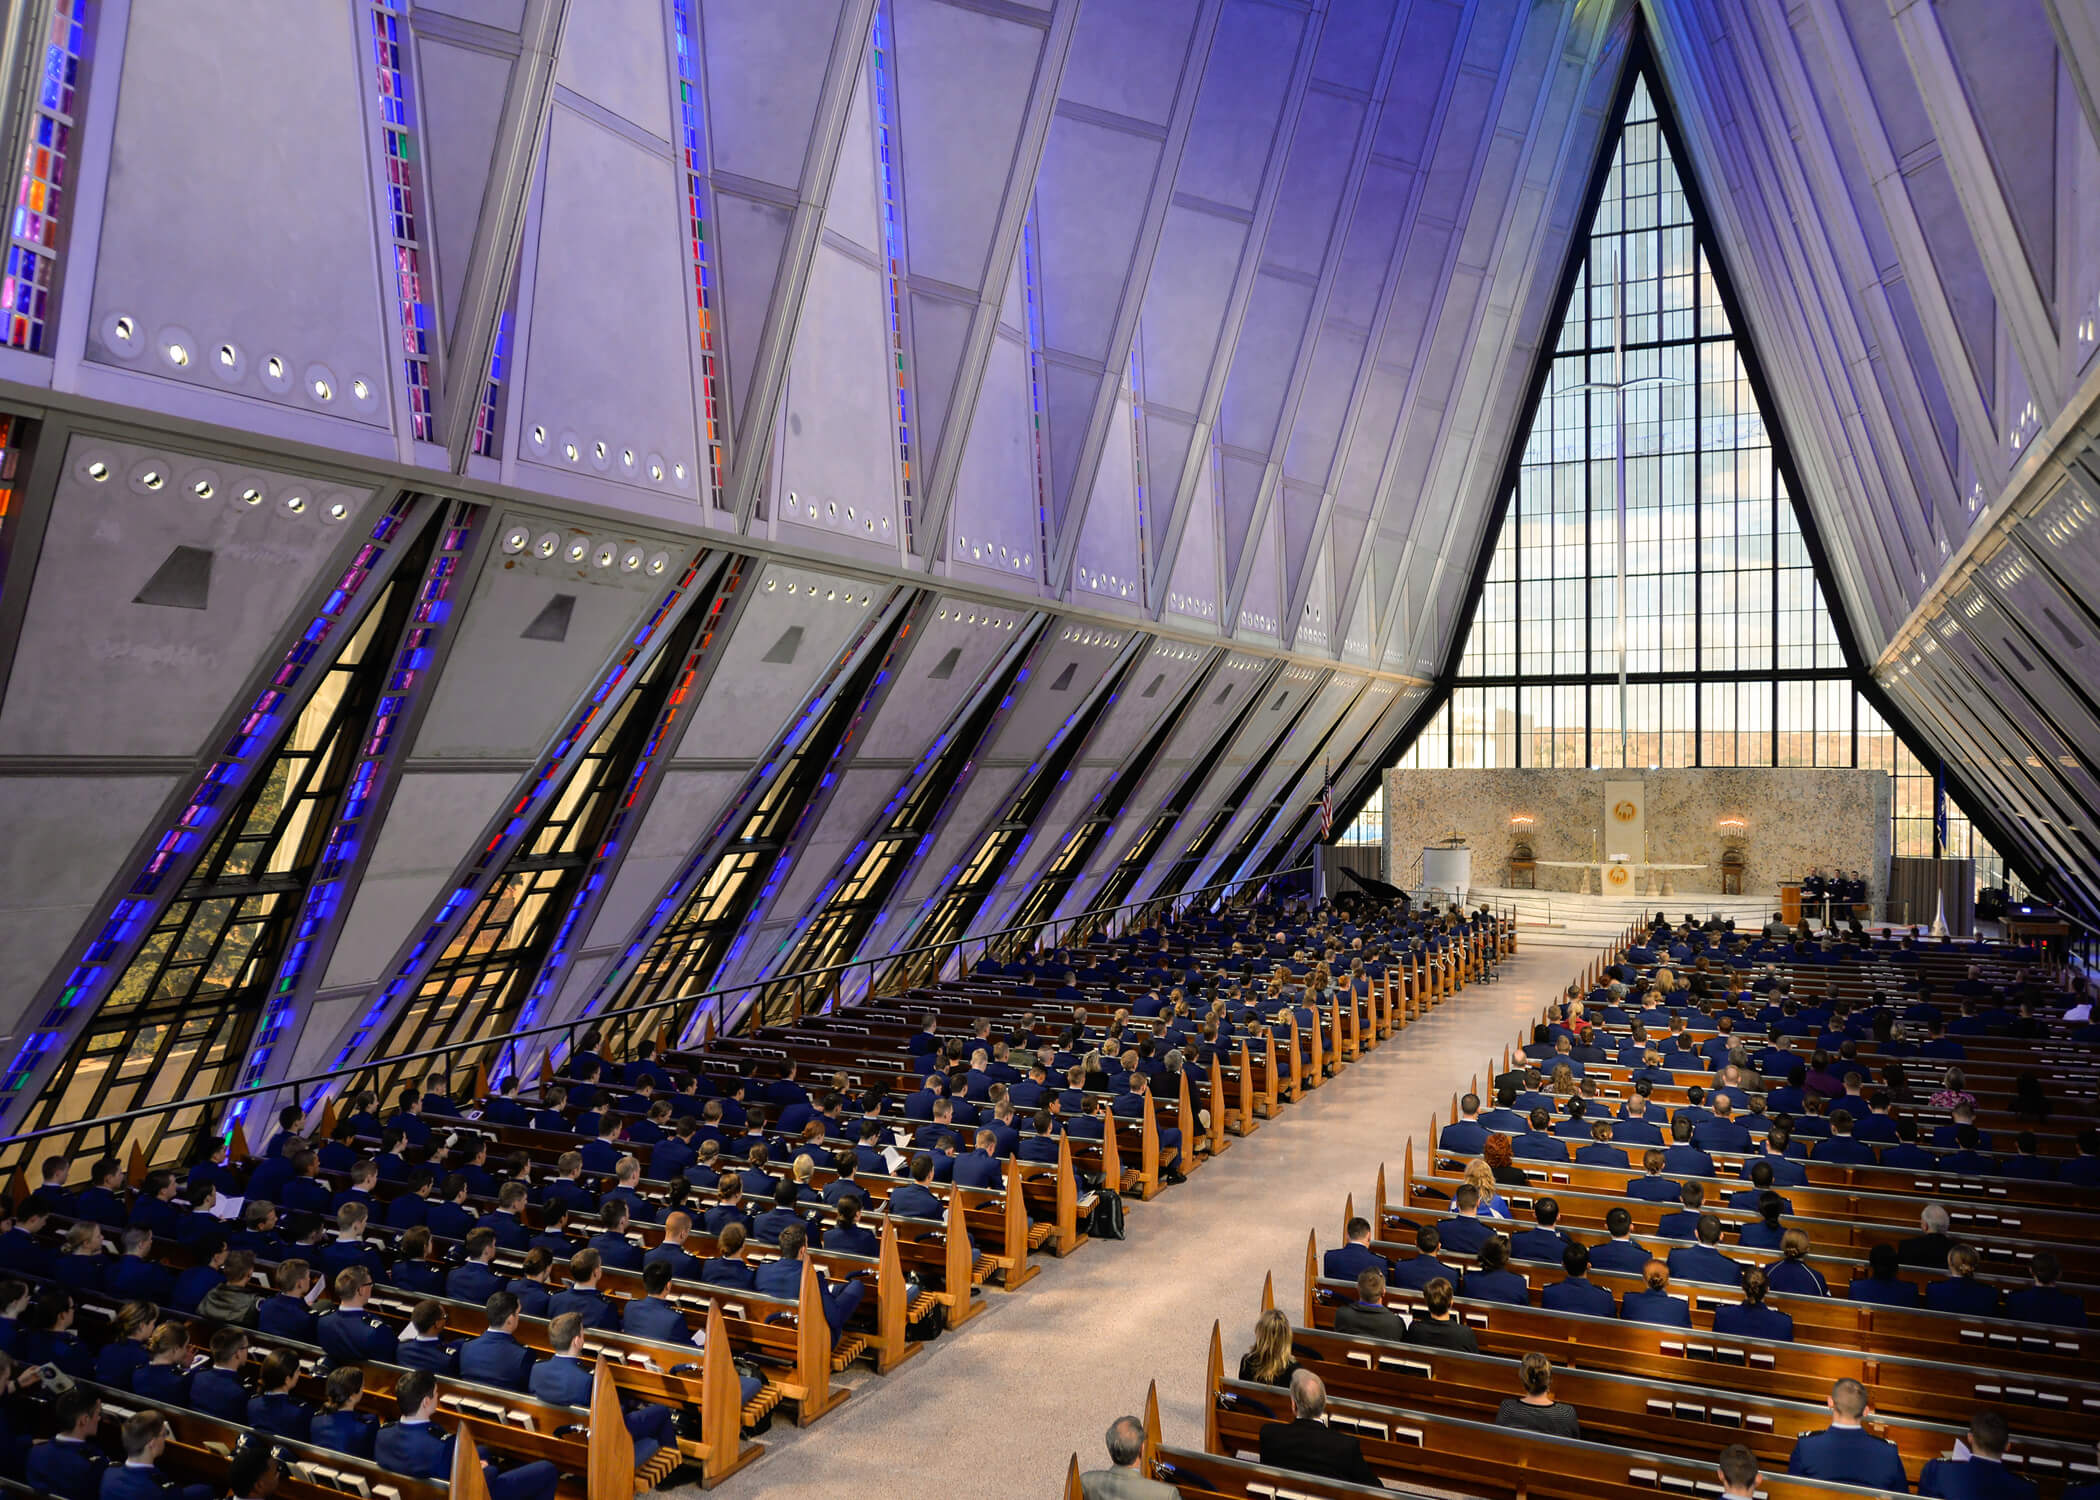 Cadet Chapel - United States Air Force Academy